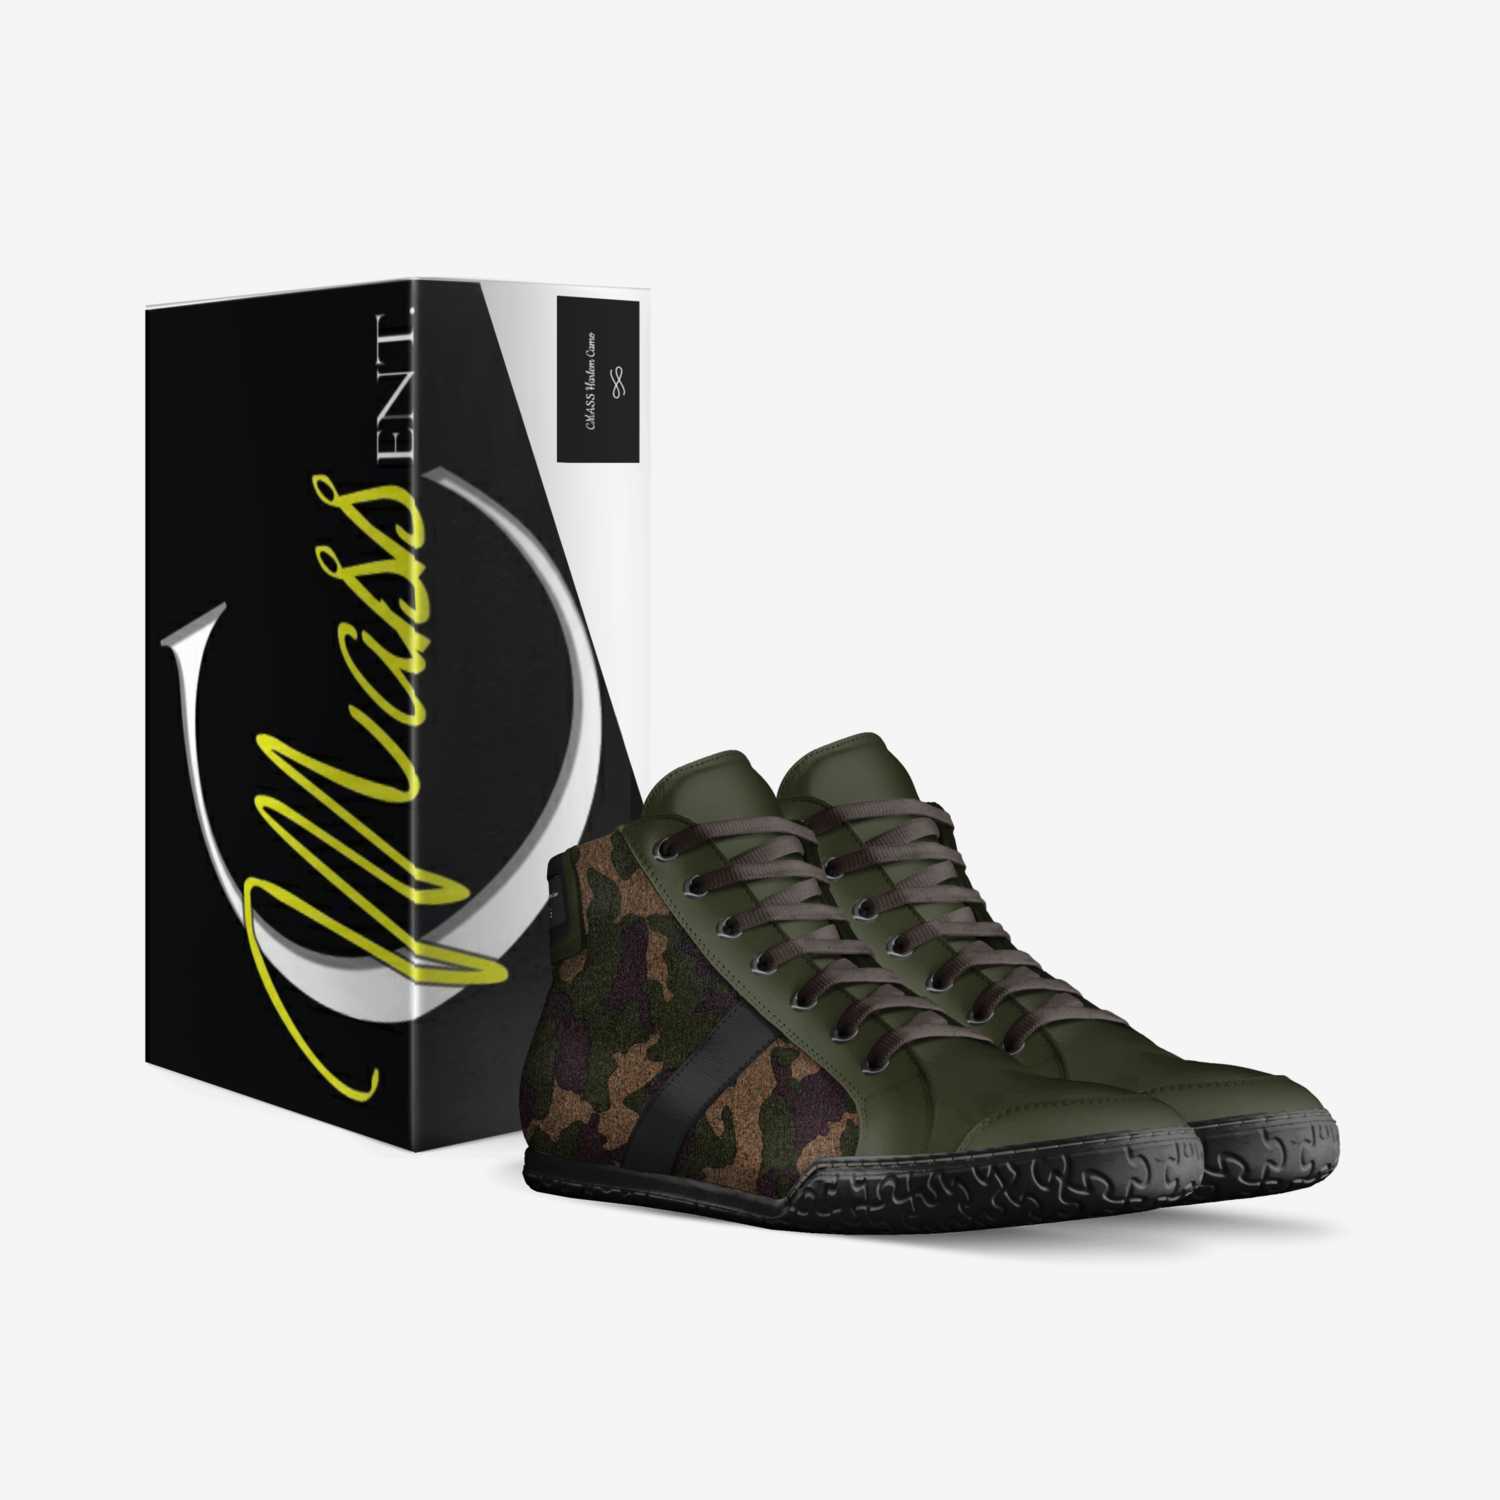 CMASS Harlem Camo custom made in Italy shoes by Charles Massey | Box view